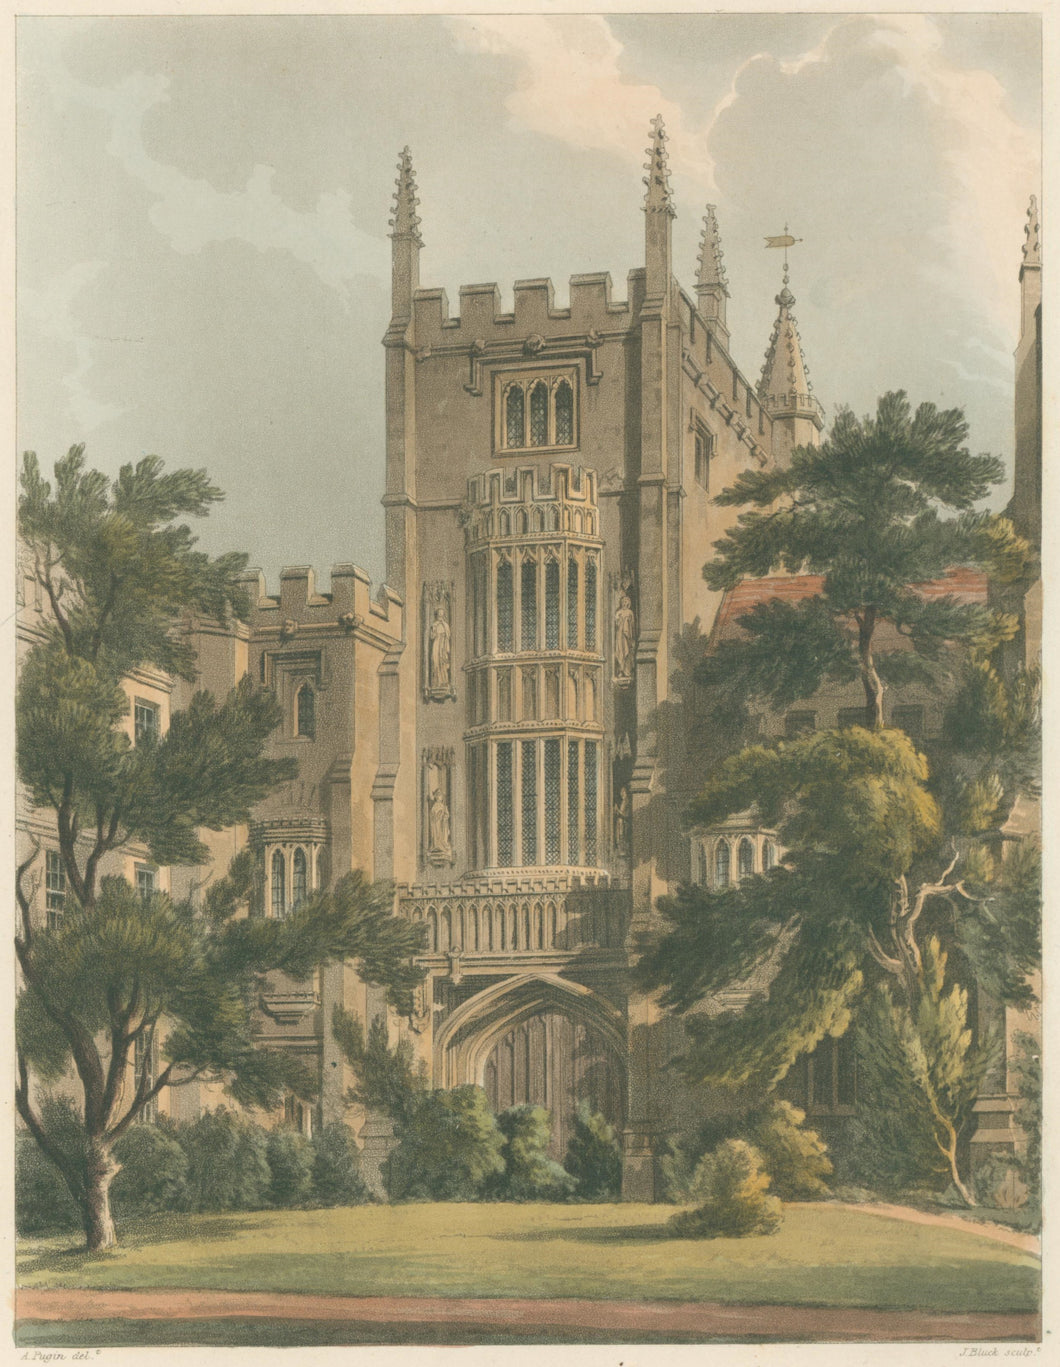 Pugin, A.  “New College.  Entrance Gate.”  [Old Gate of Magdalen College]